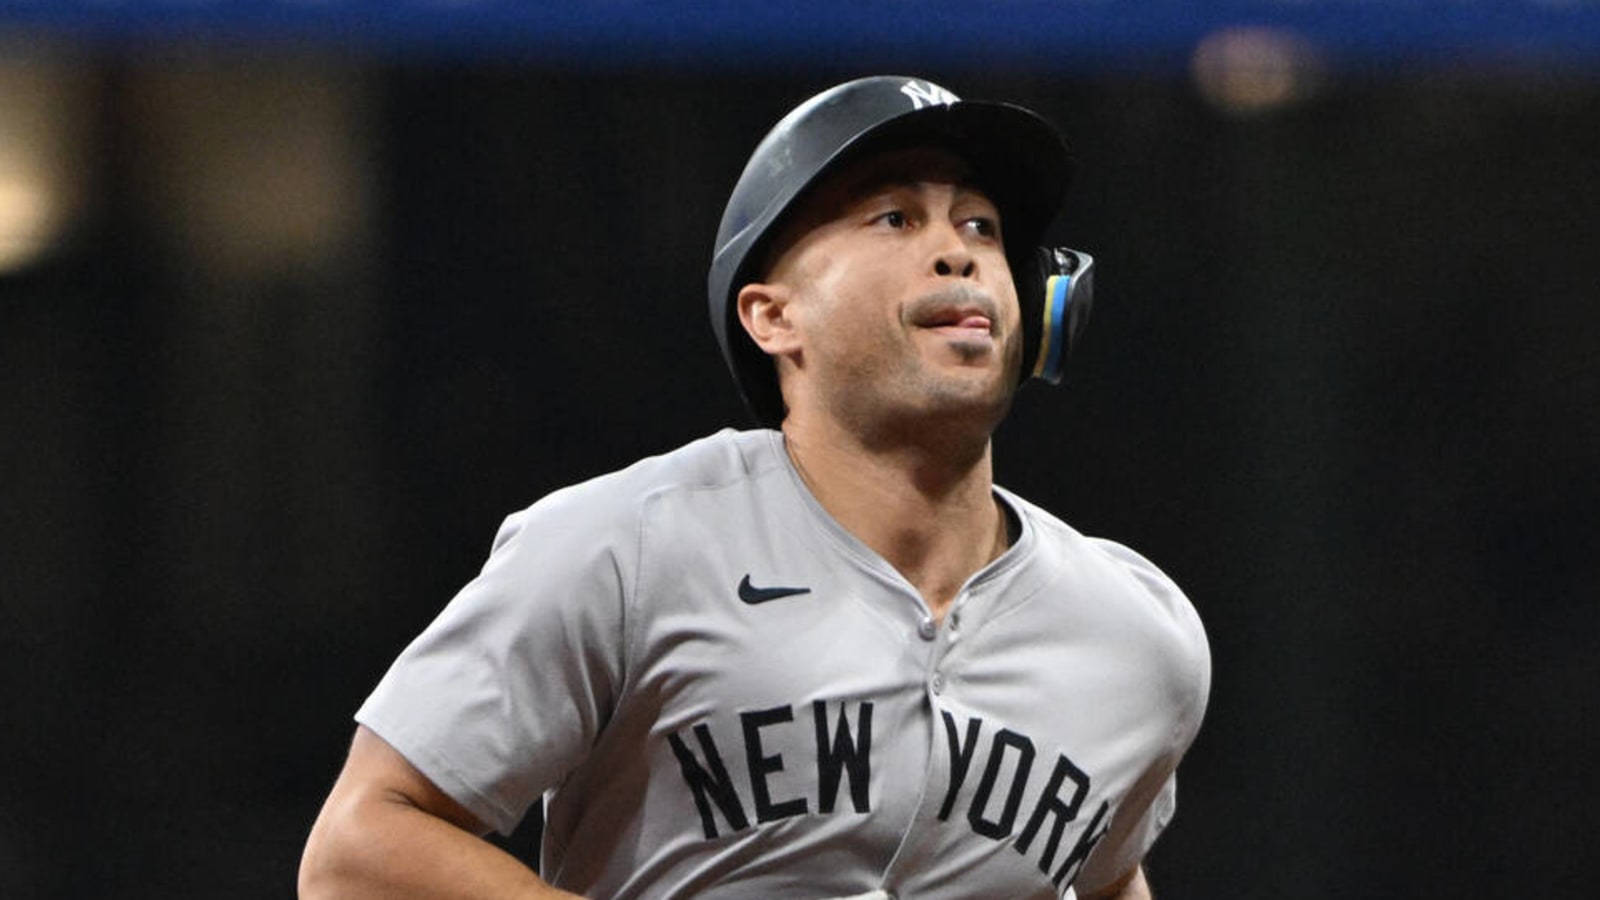 Yankees' Giancarlo Stanton has another brutal baserunning moment